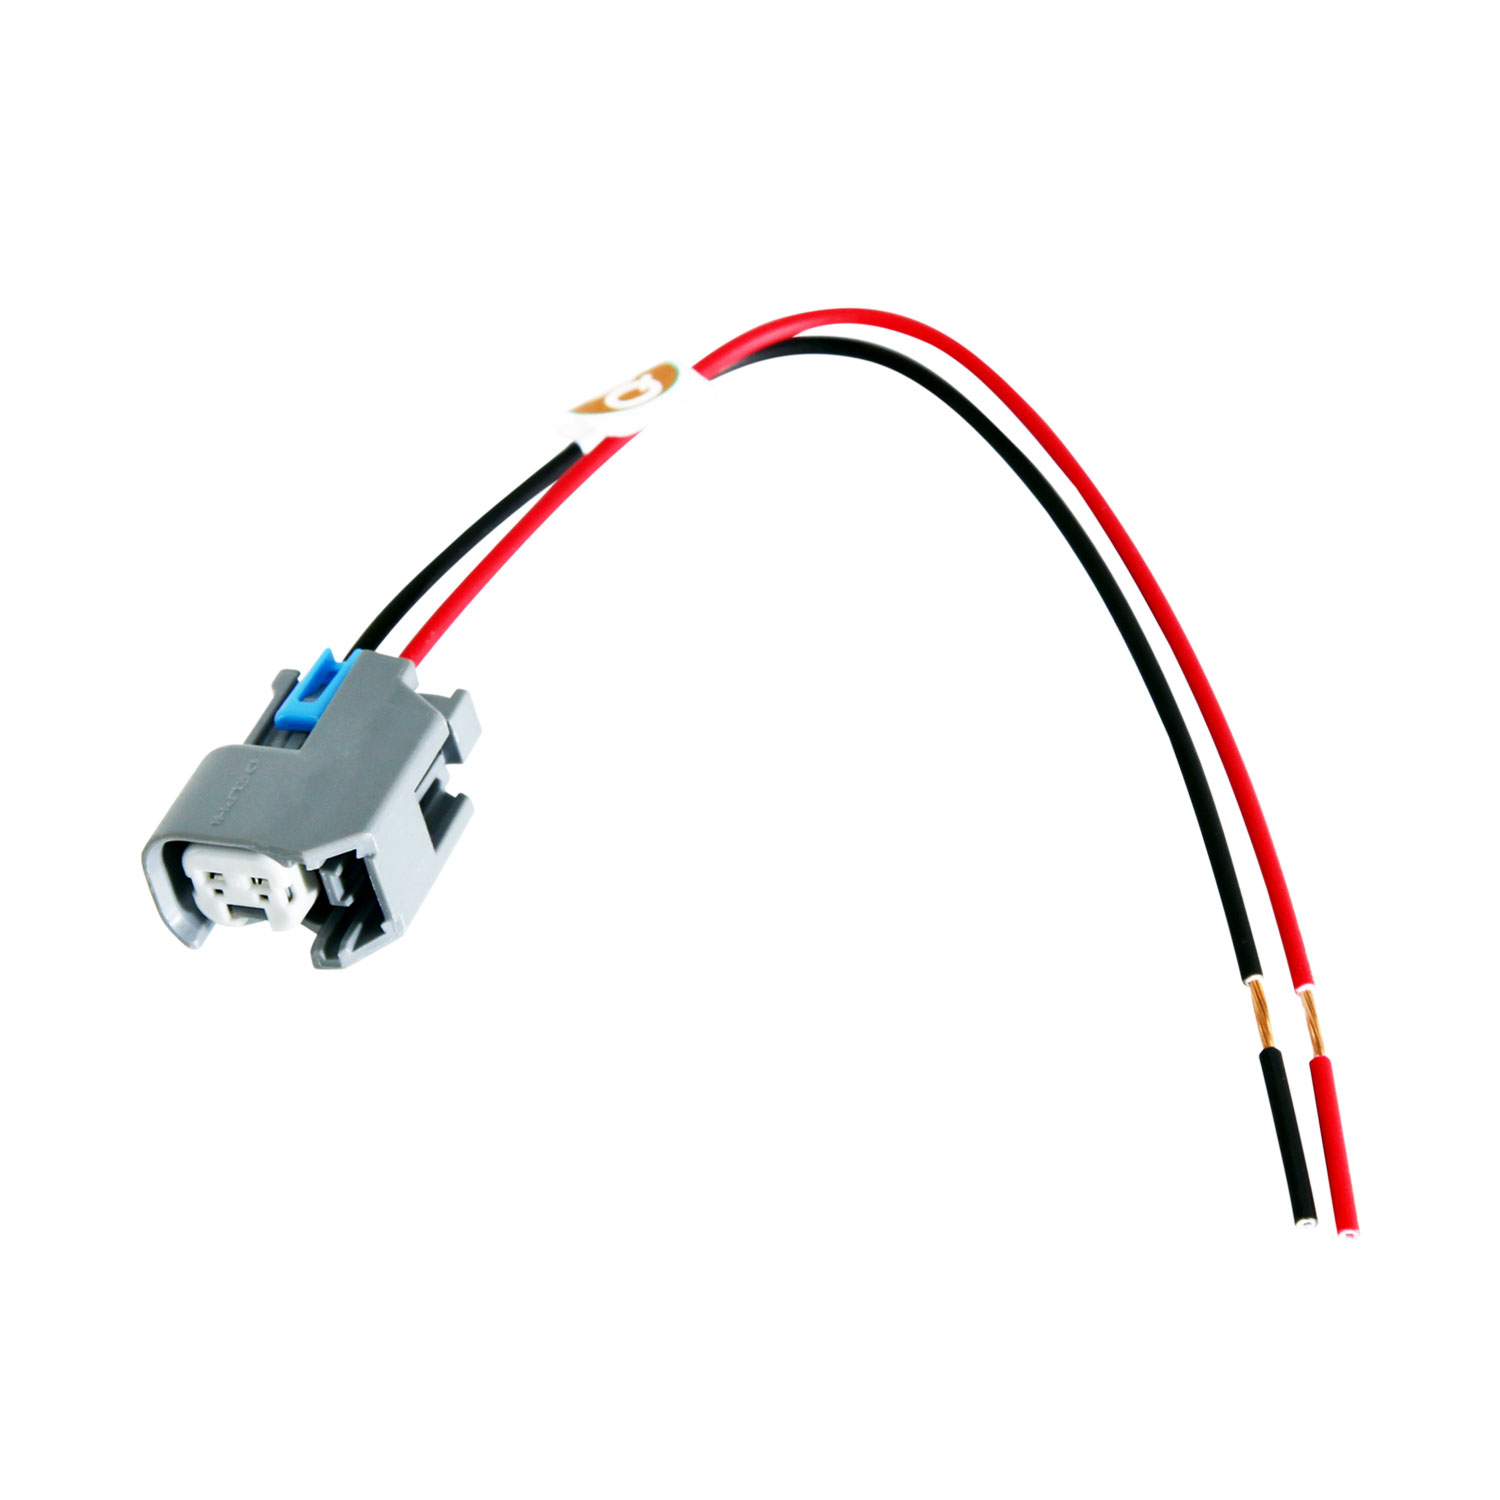 FAST 170603-4 Minitimer to USCAR Type Fuel Injector Adapter Harness 